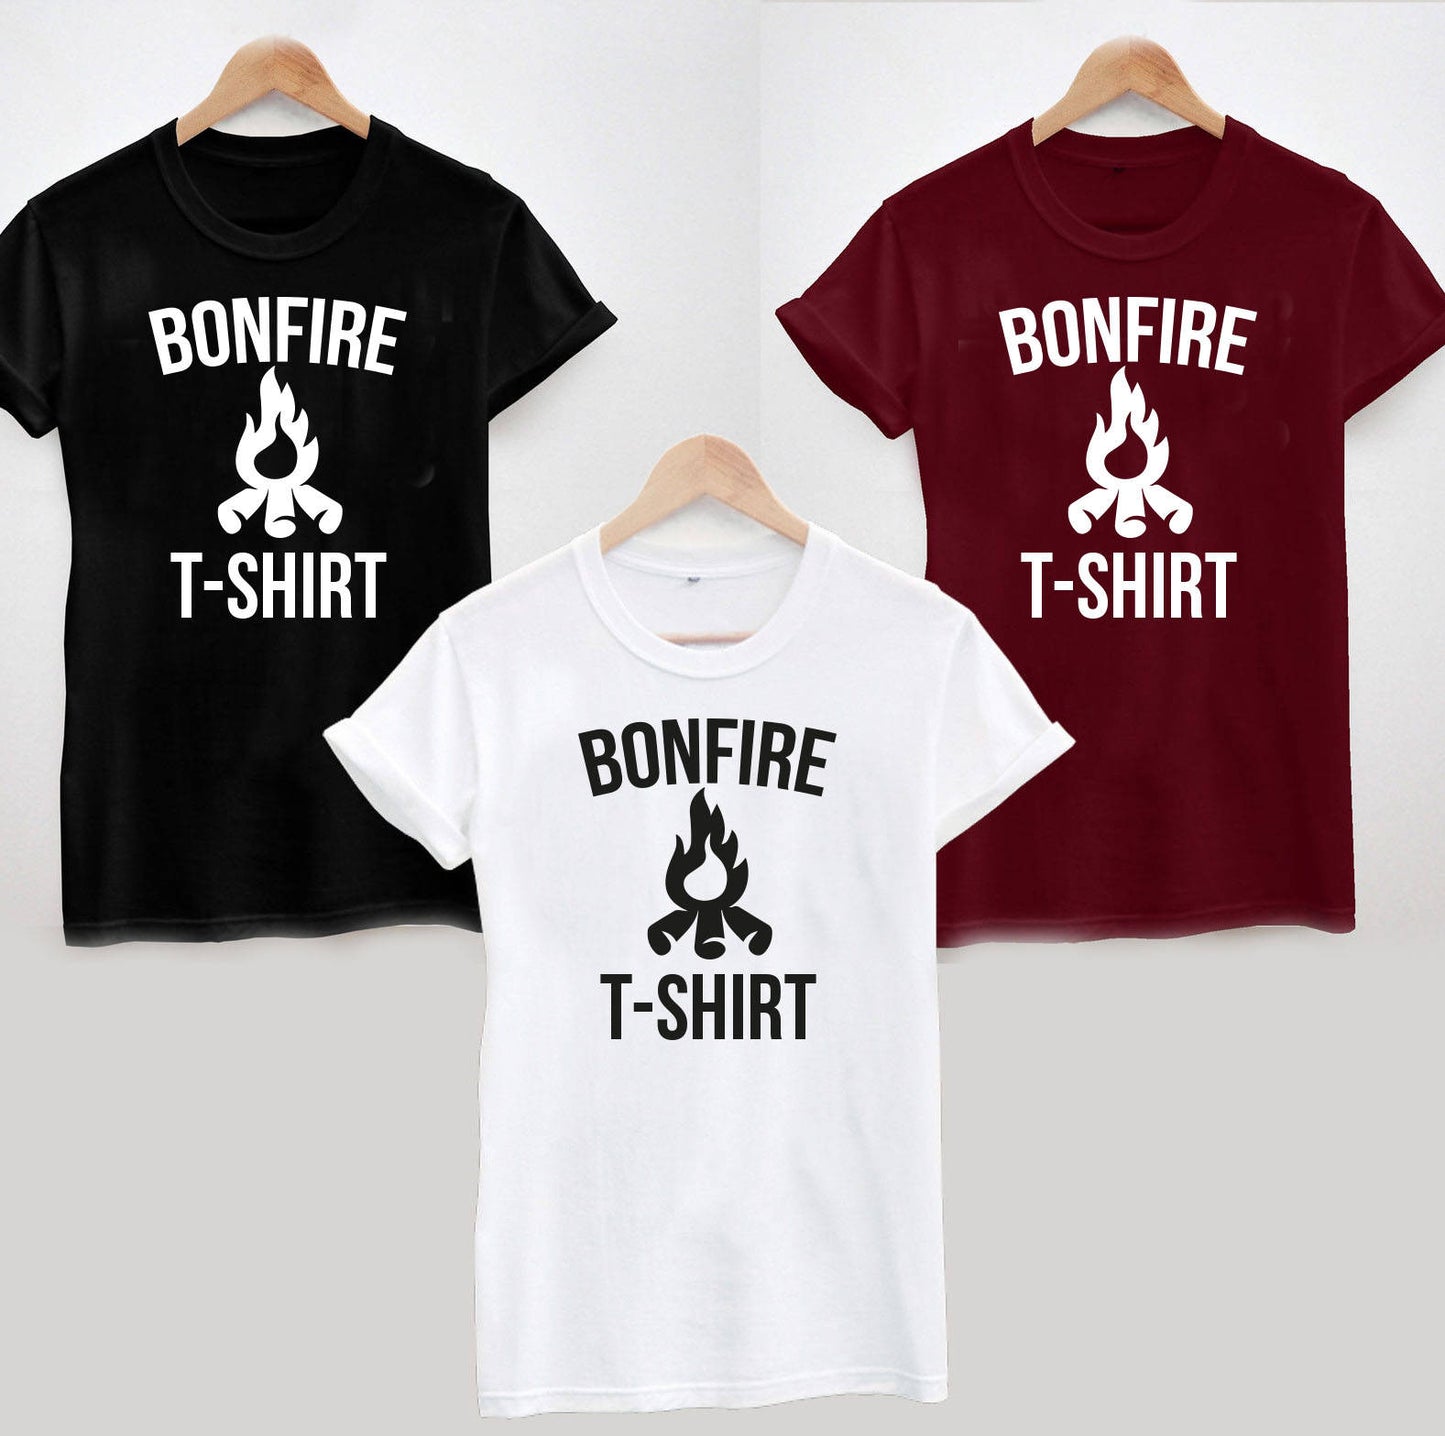 Bonfire T-Shirt, Cool, Funny, Guy Fawkes' Night, Fireworks